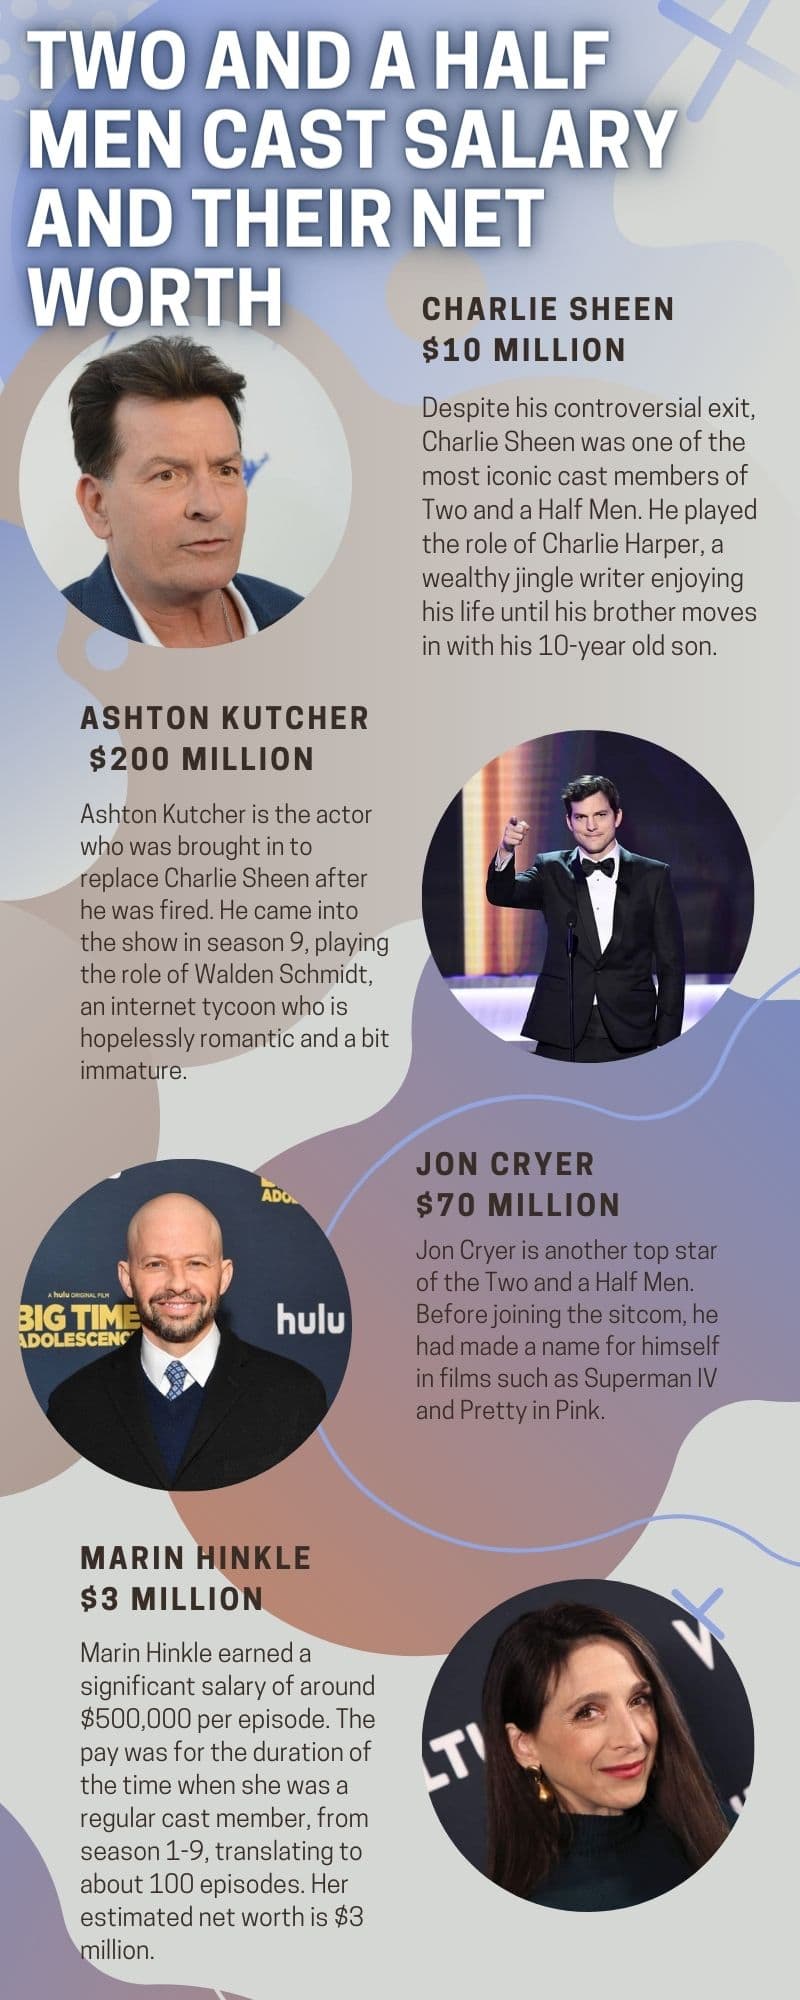 Two and a Half Men cast salary